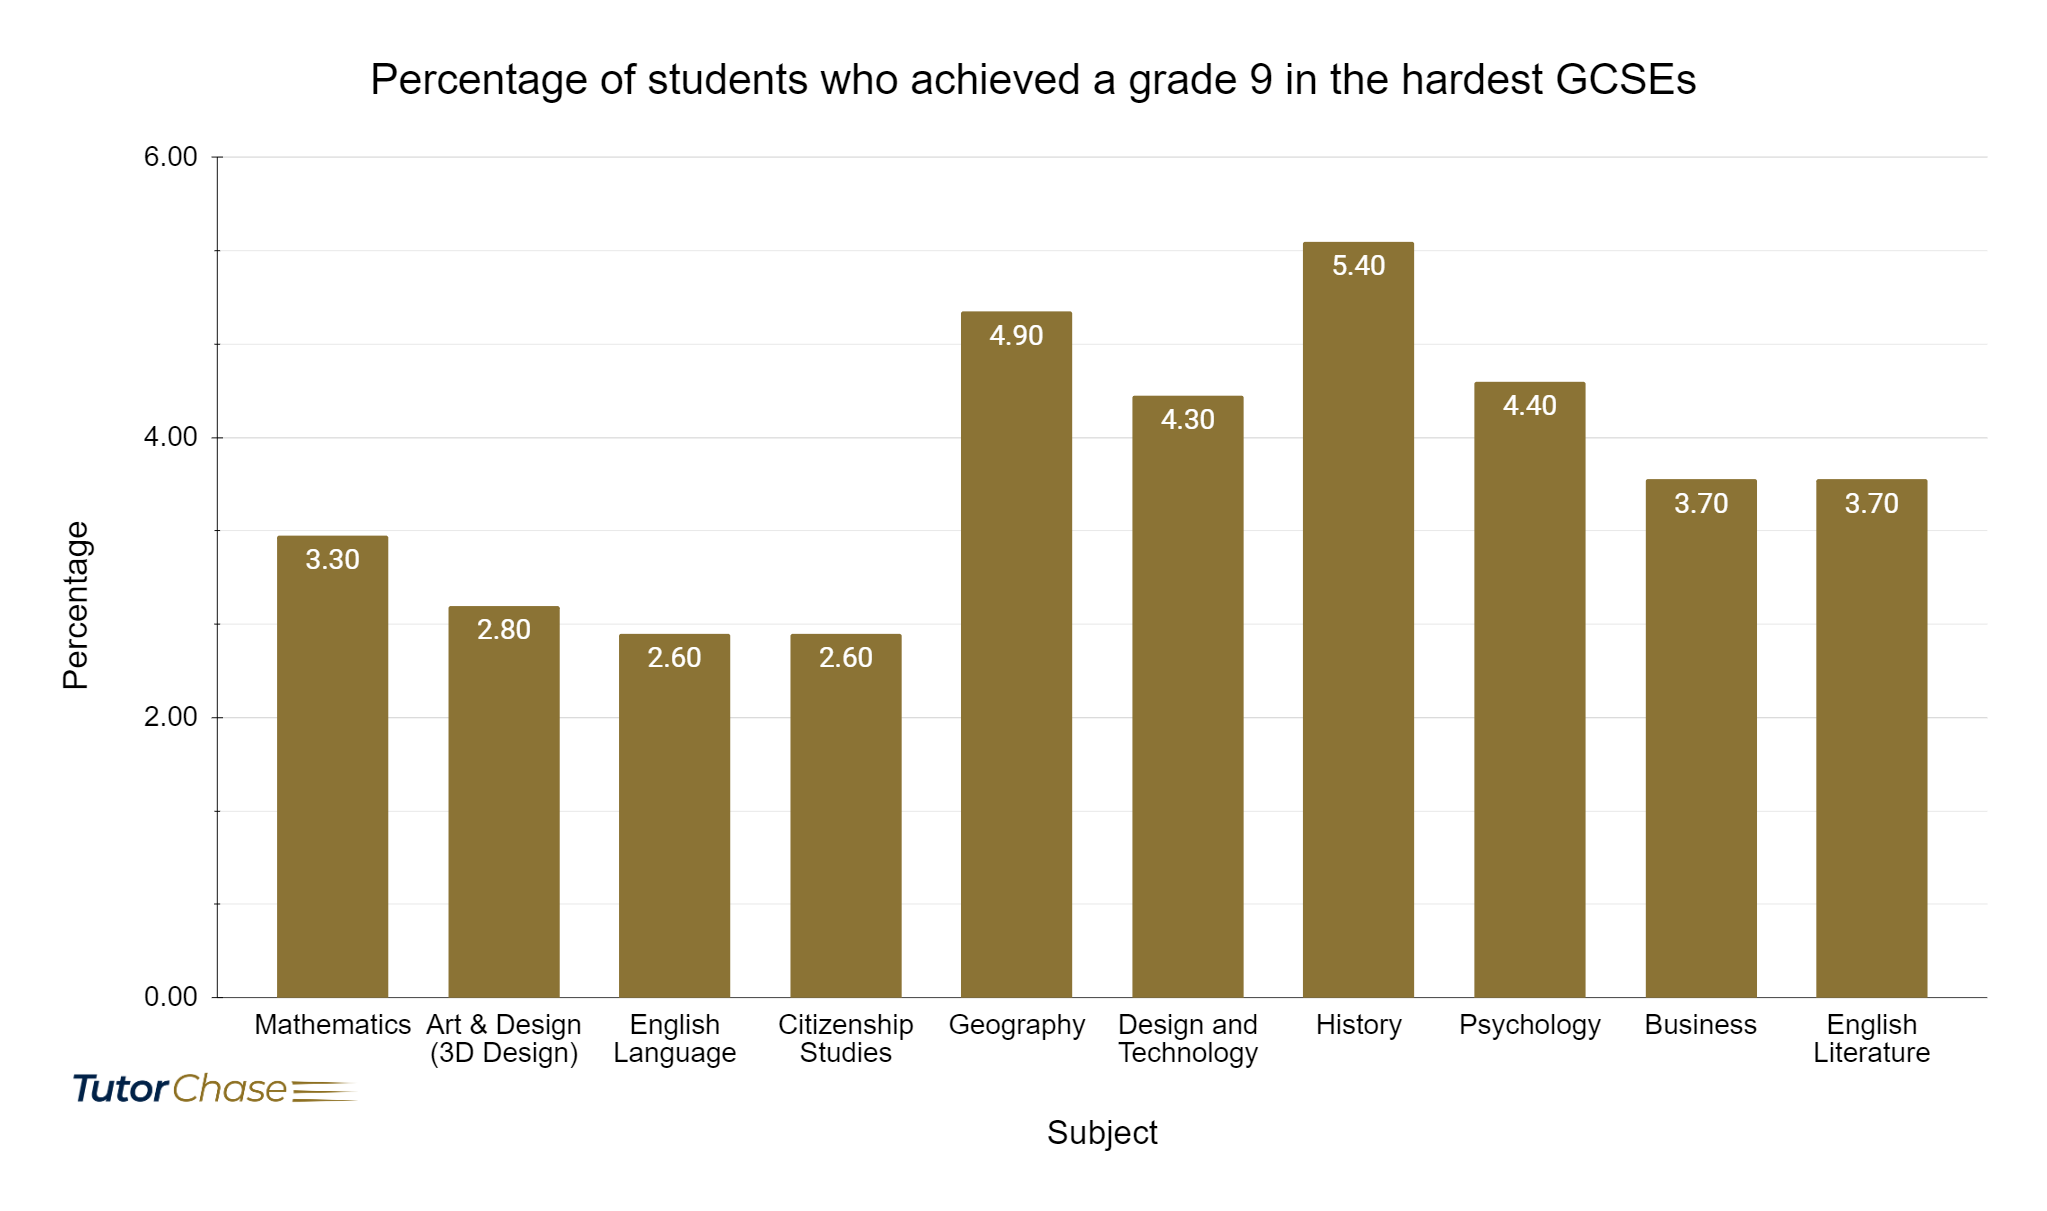 Percentage of students who achieved a grade 9 in the hardest GCSEs